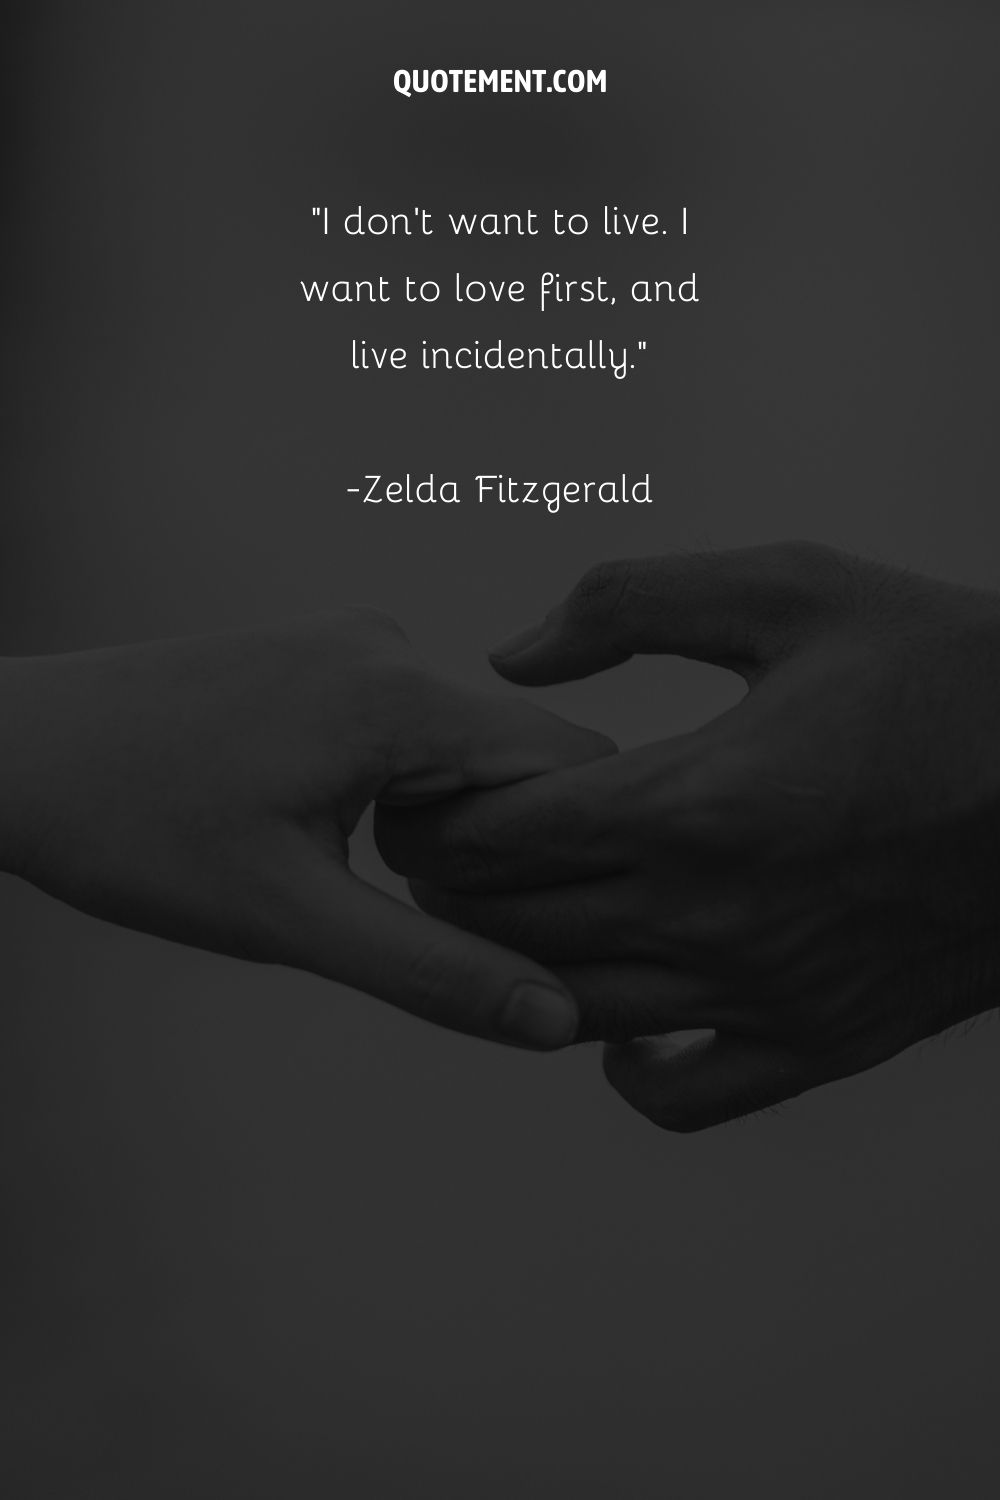 A gentle hand-hold representing a quote by Zelda Fitzgerald
